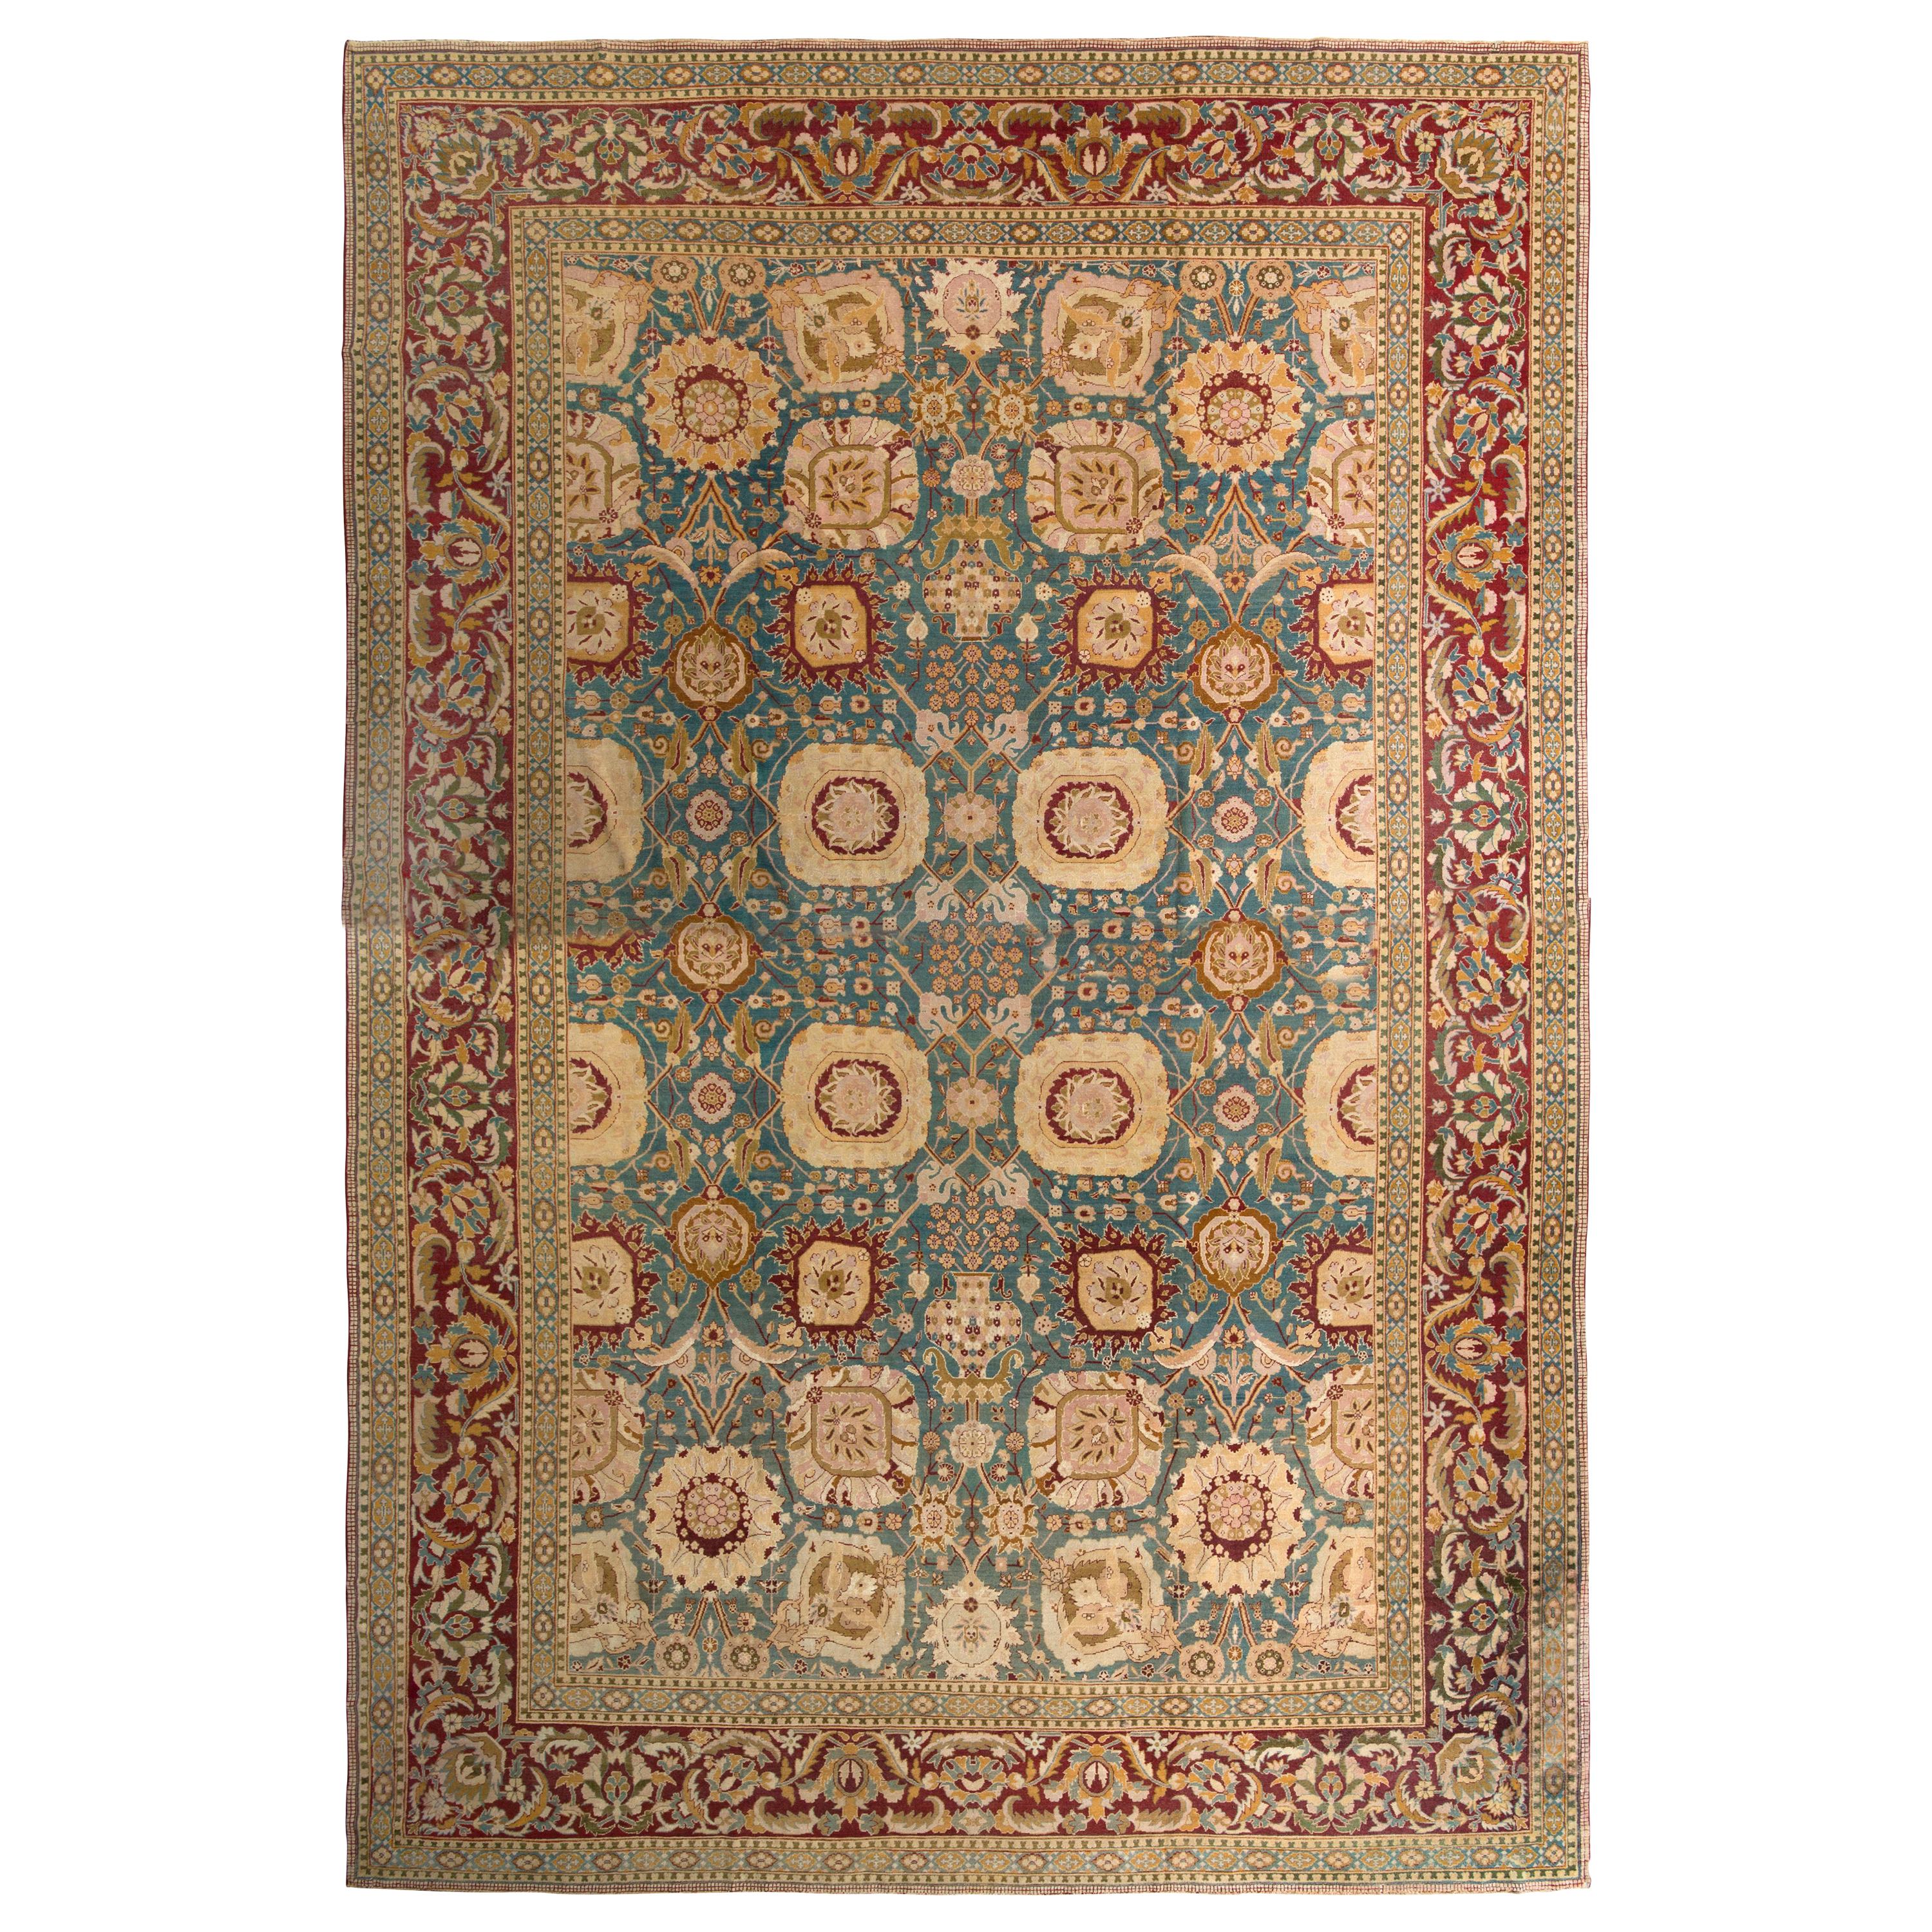 Antique Amritsar Rug in Blue with Gold & Red Floral Patterns, from Rug & Kilim